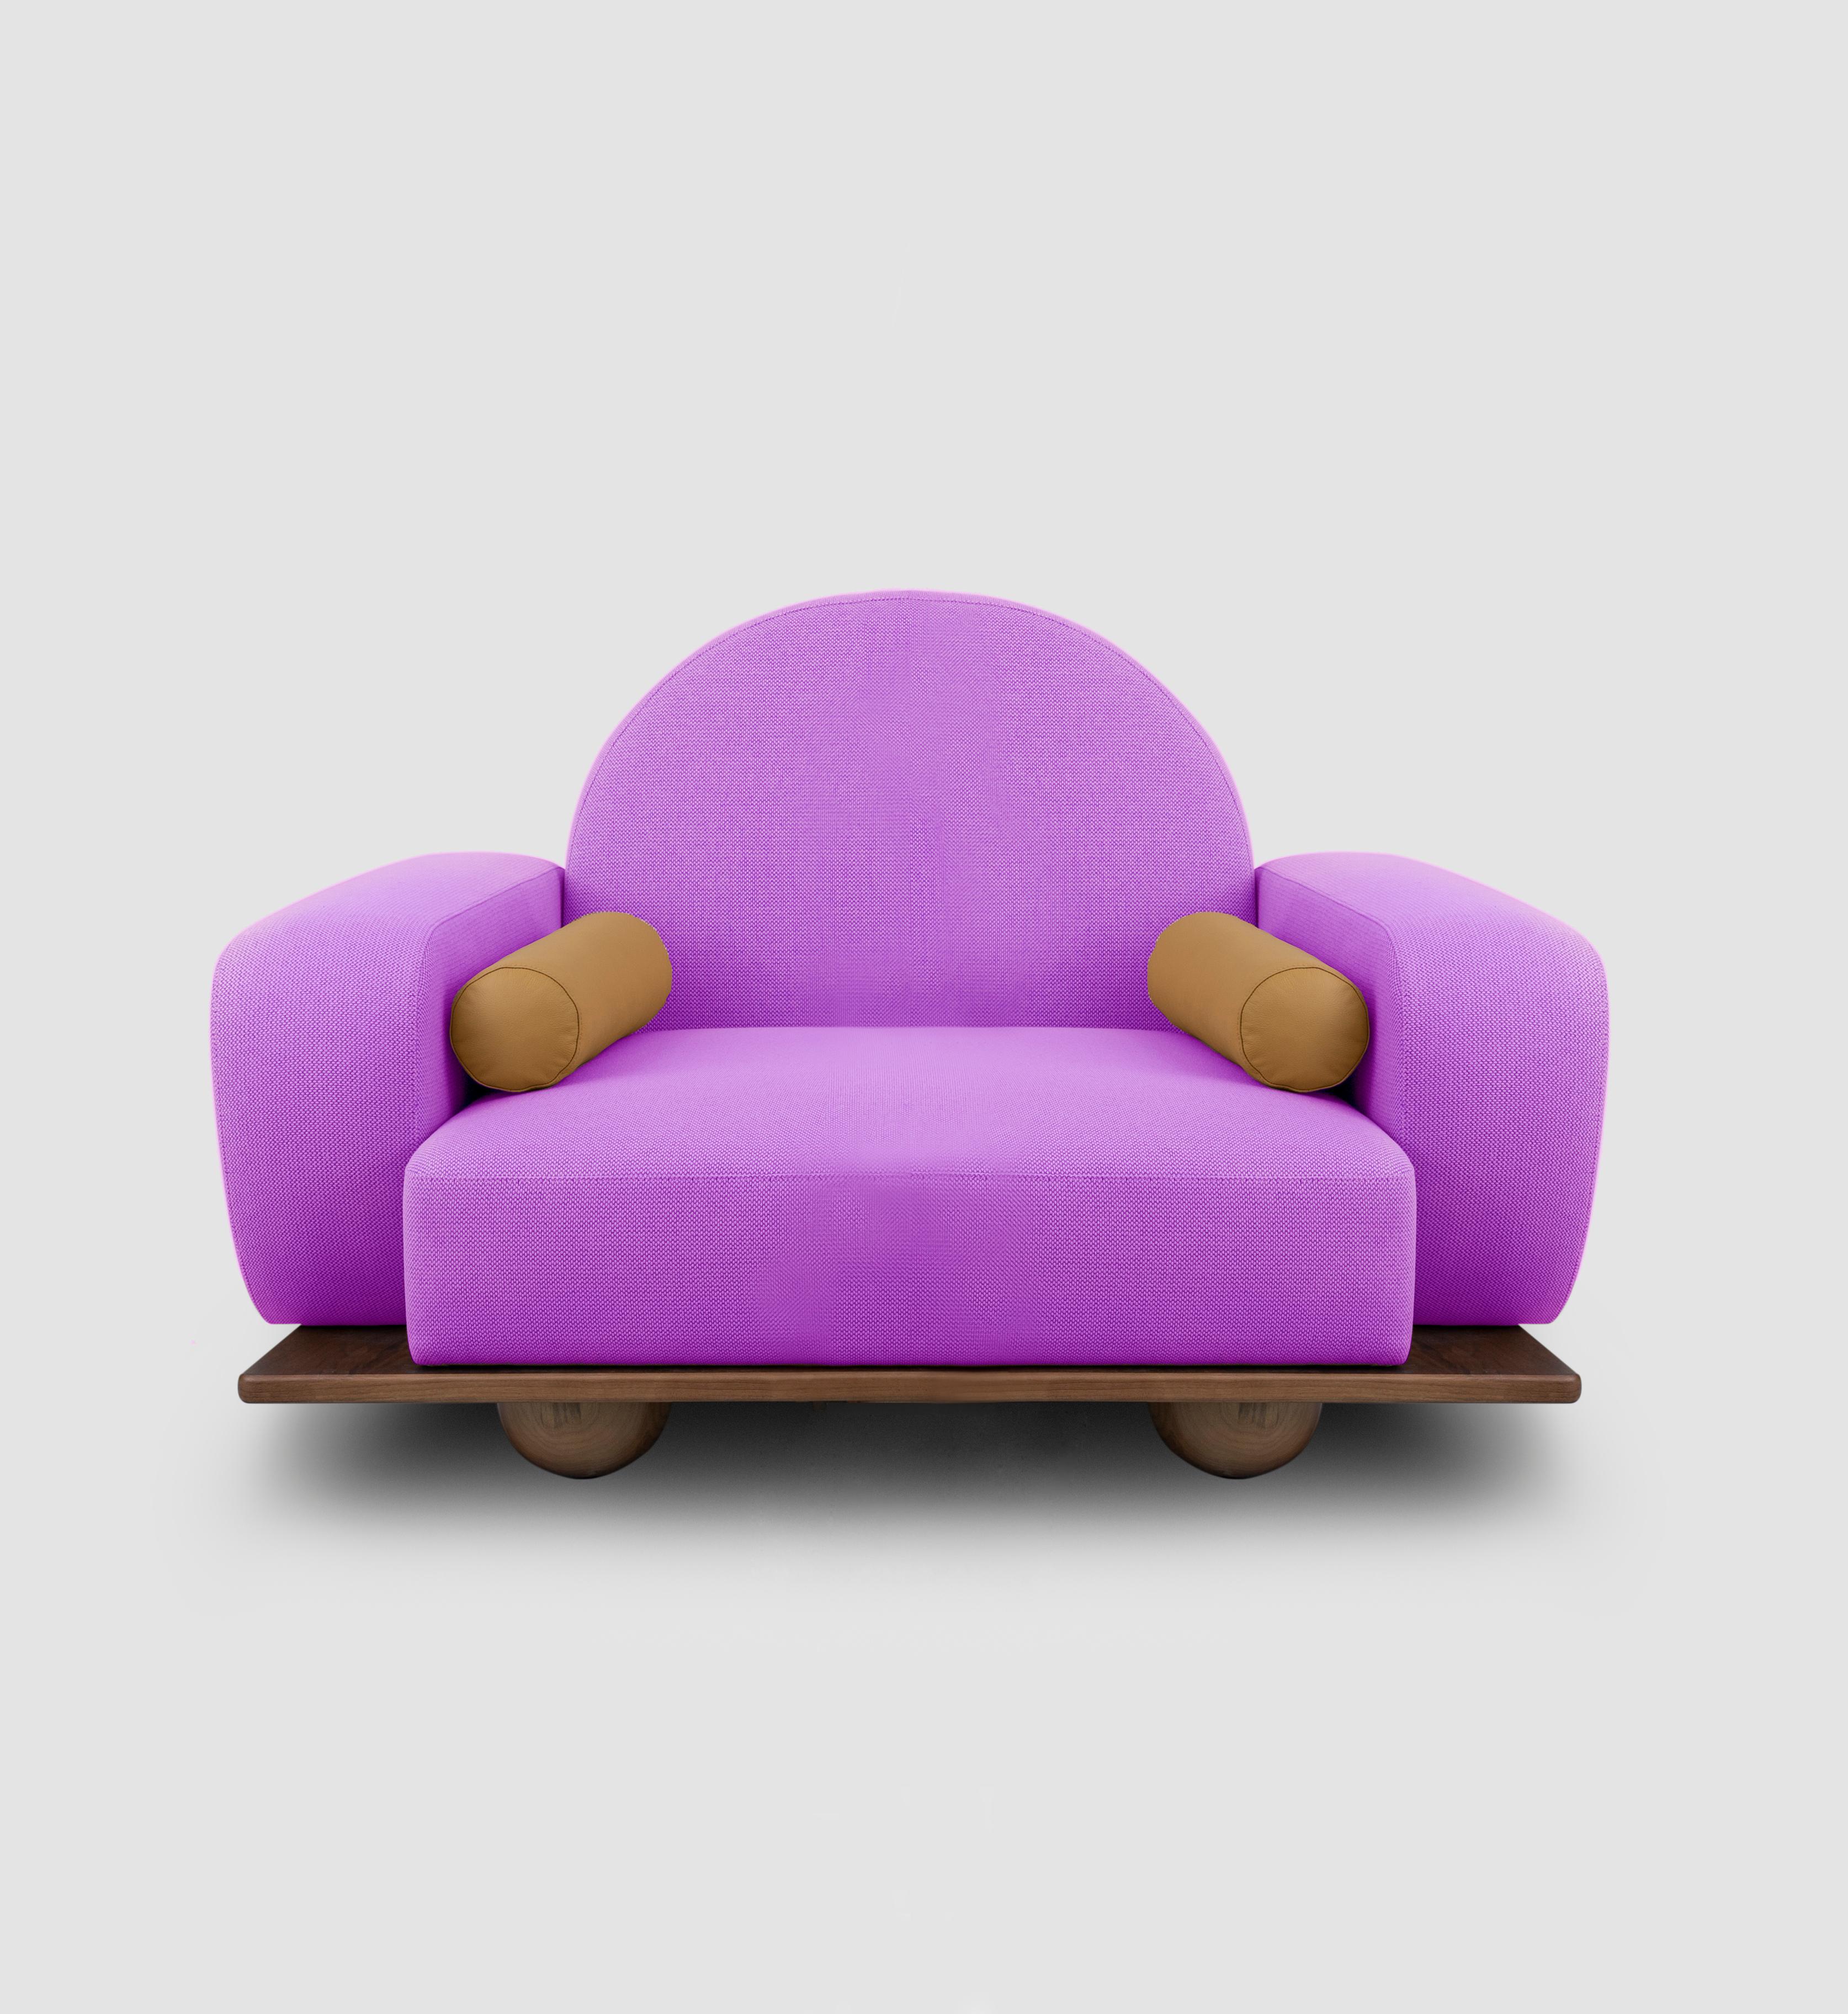 Beice armchair is designed to mimic the feeling of sitting on a cotton candy cloud. The combination of its color, arc shaped backrest, round edges and sphere walnut feet creates a dreamy, tender design. Beice is entirely handcrafted and customizable.